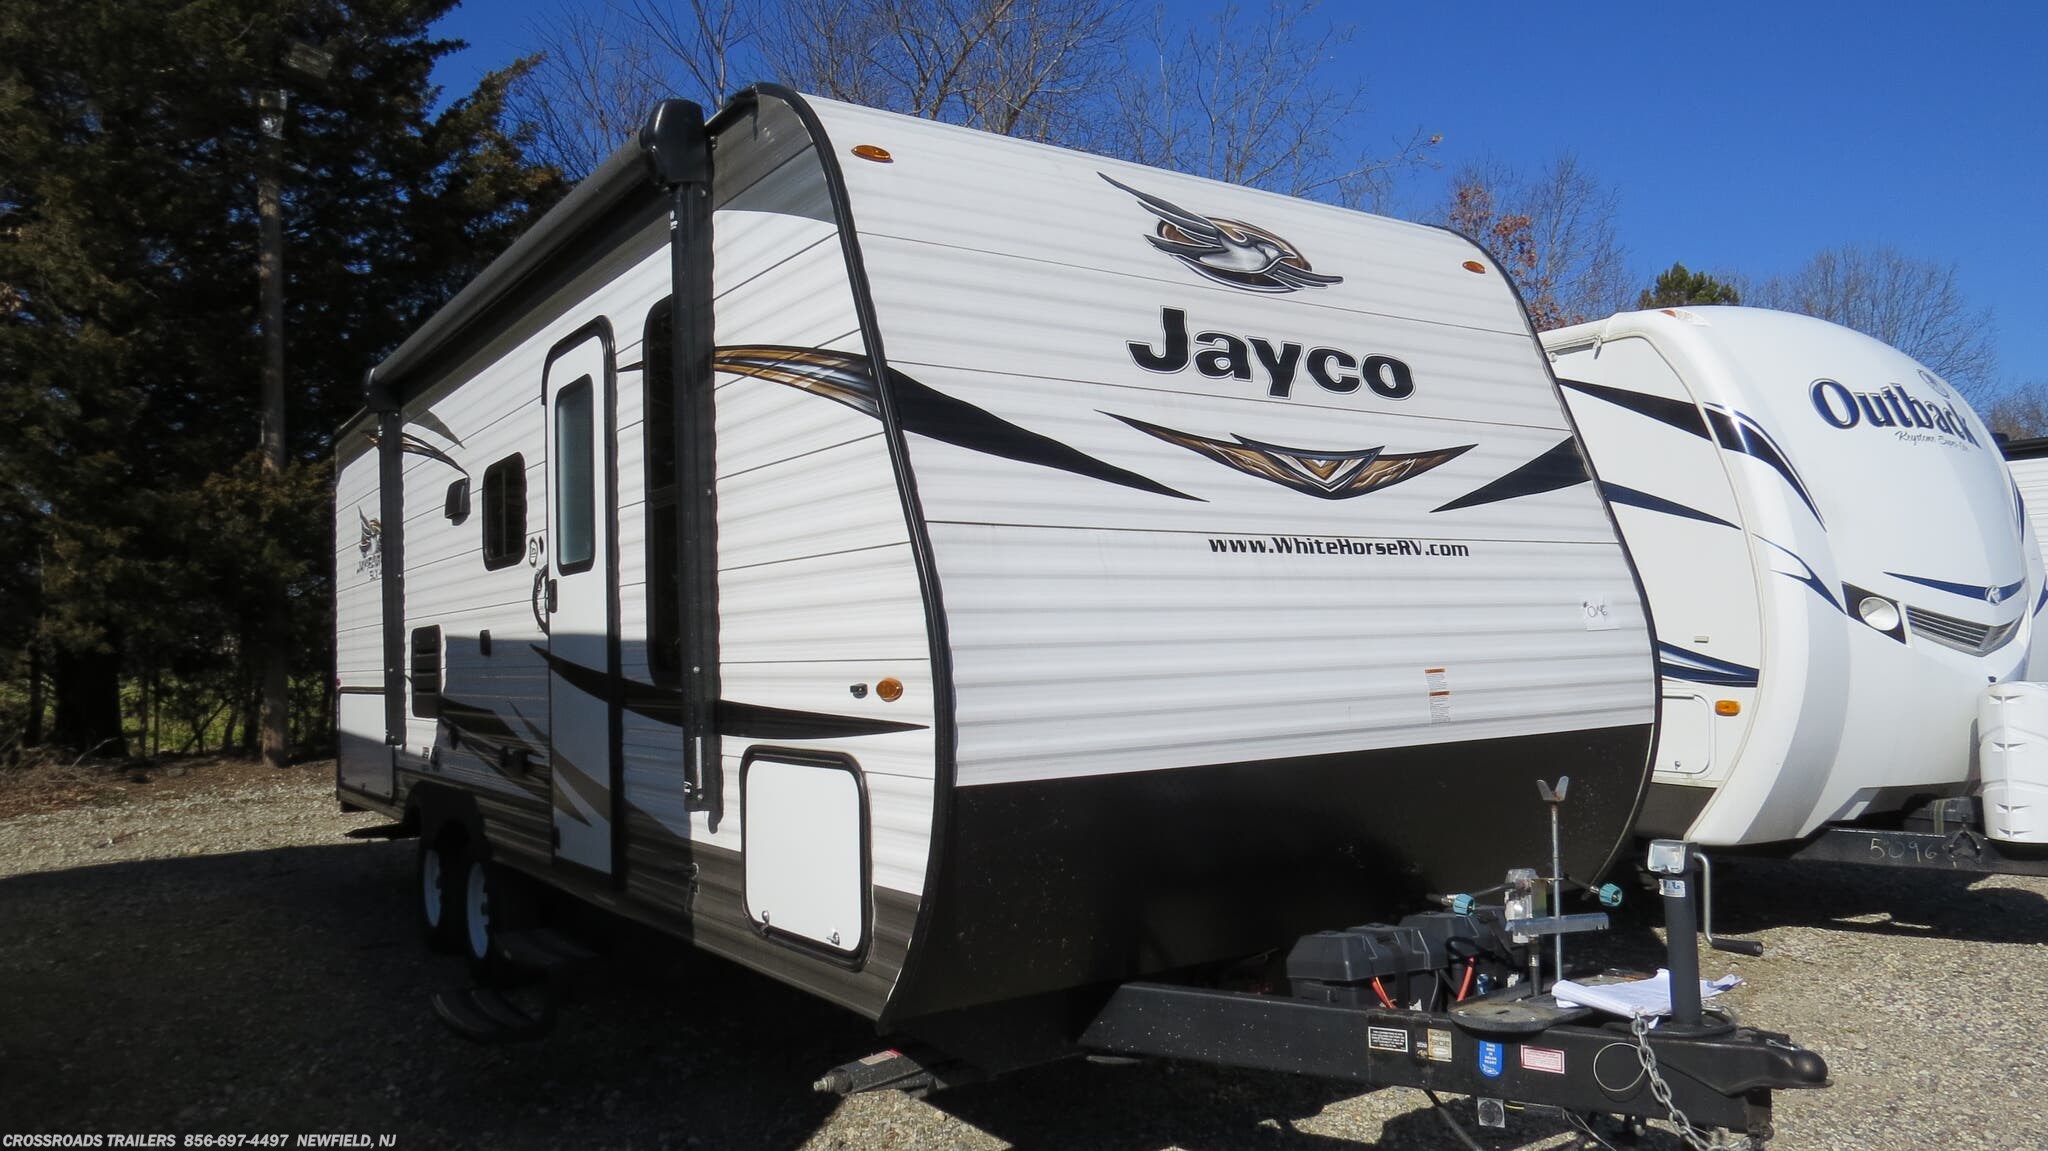 Used Travel trailers for sale in ME - TrailersMarket.com